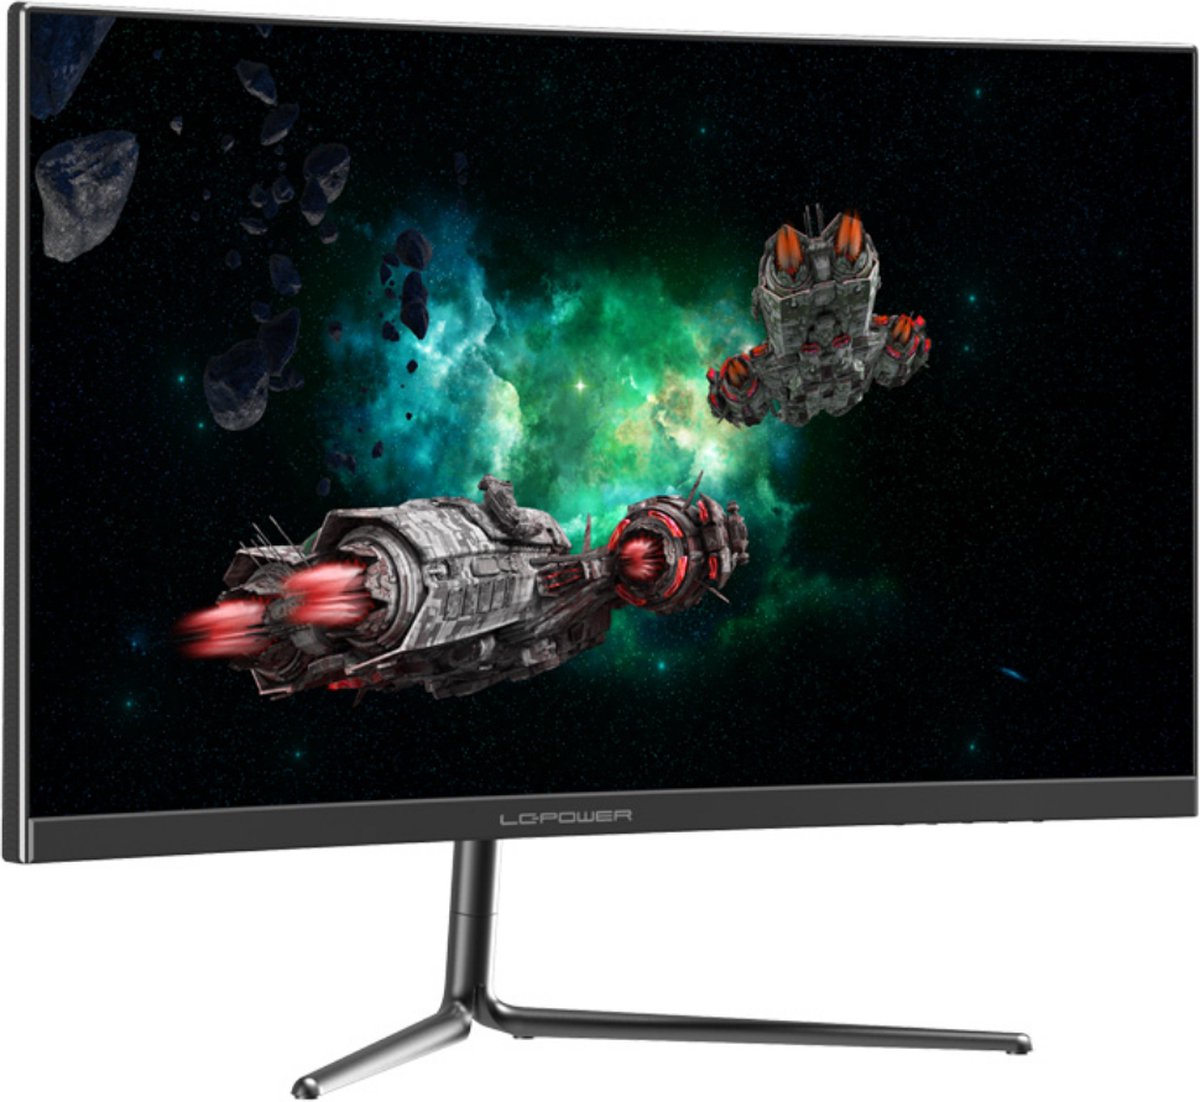 Game Hero LCP - 27 inch Curved PC Monitor - Full HD - Adaptive Sync - Gaming Monitor - 165 Hz - 16:9 Widescreen